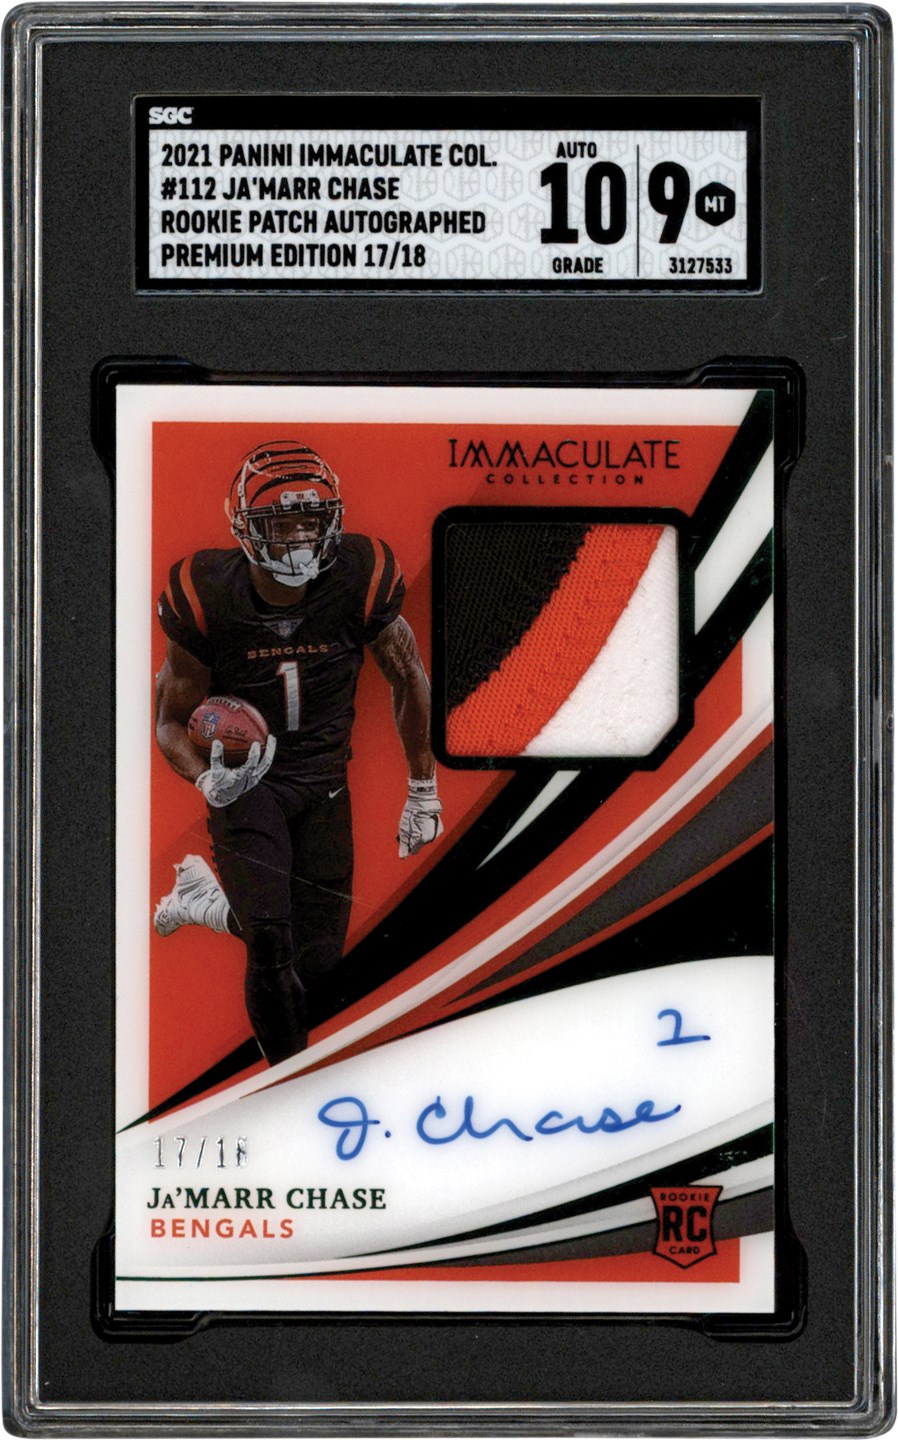 - 2021 Panini Immaculate Collection Football #112 Ja'Marr Chase RPA Premium Edition Card #17/18 SGC MT 9 Auto 10